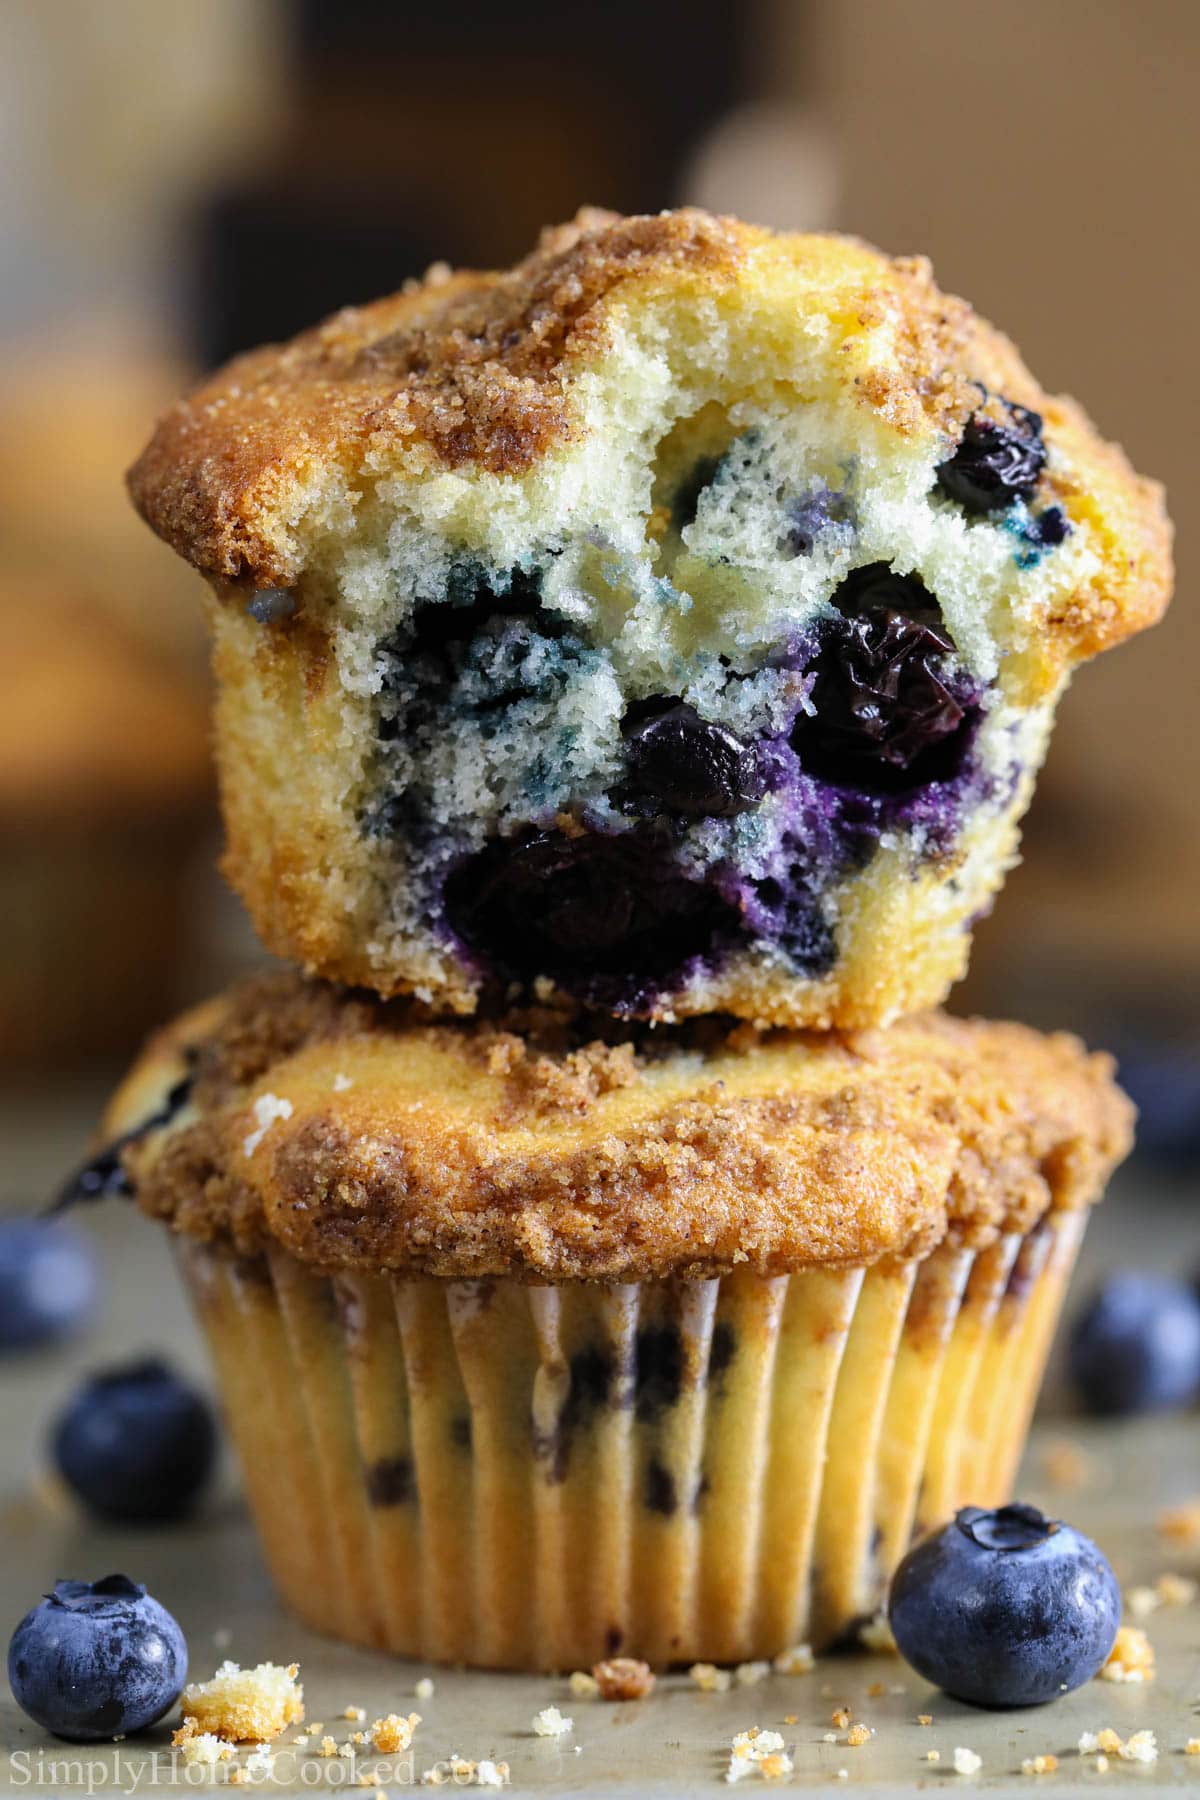 Vertical image of blueberry muffins stacked on each other, one missing a bite